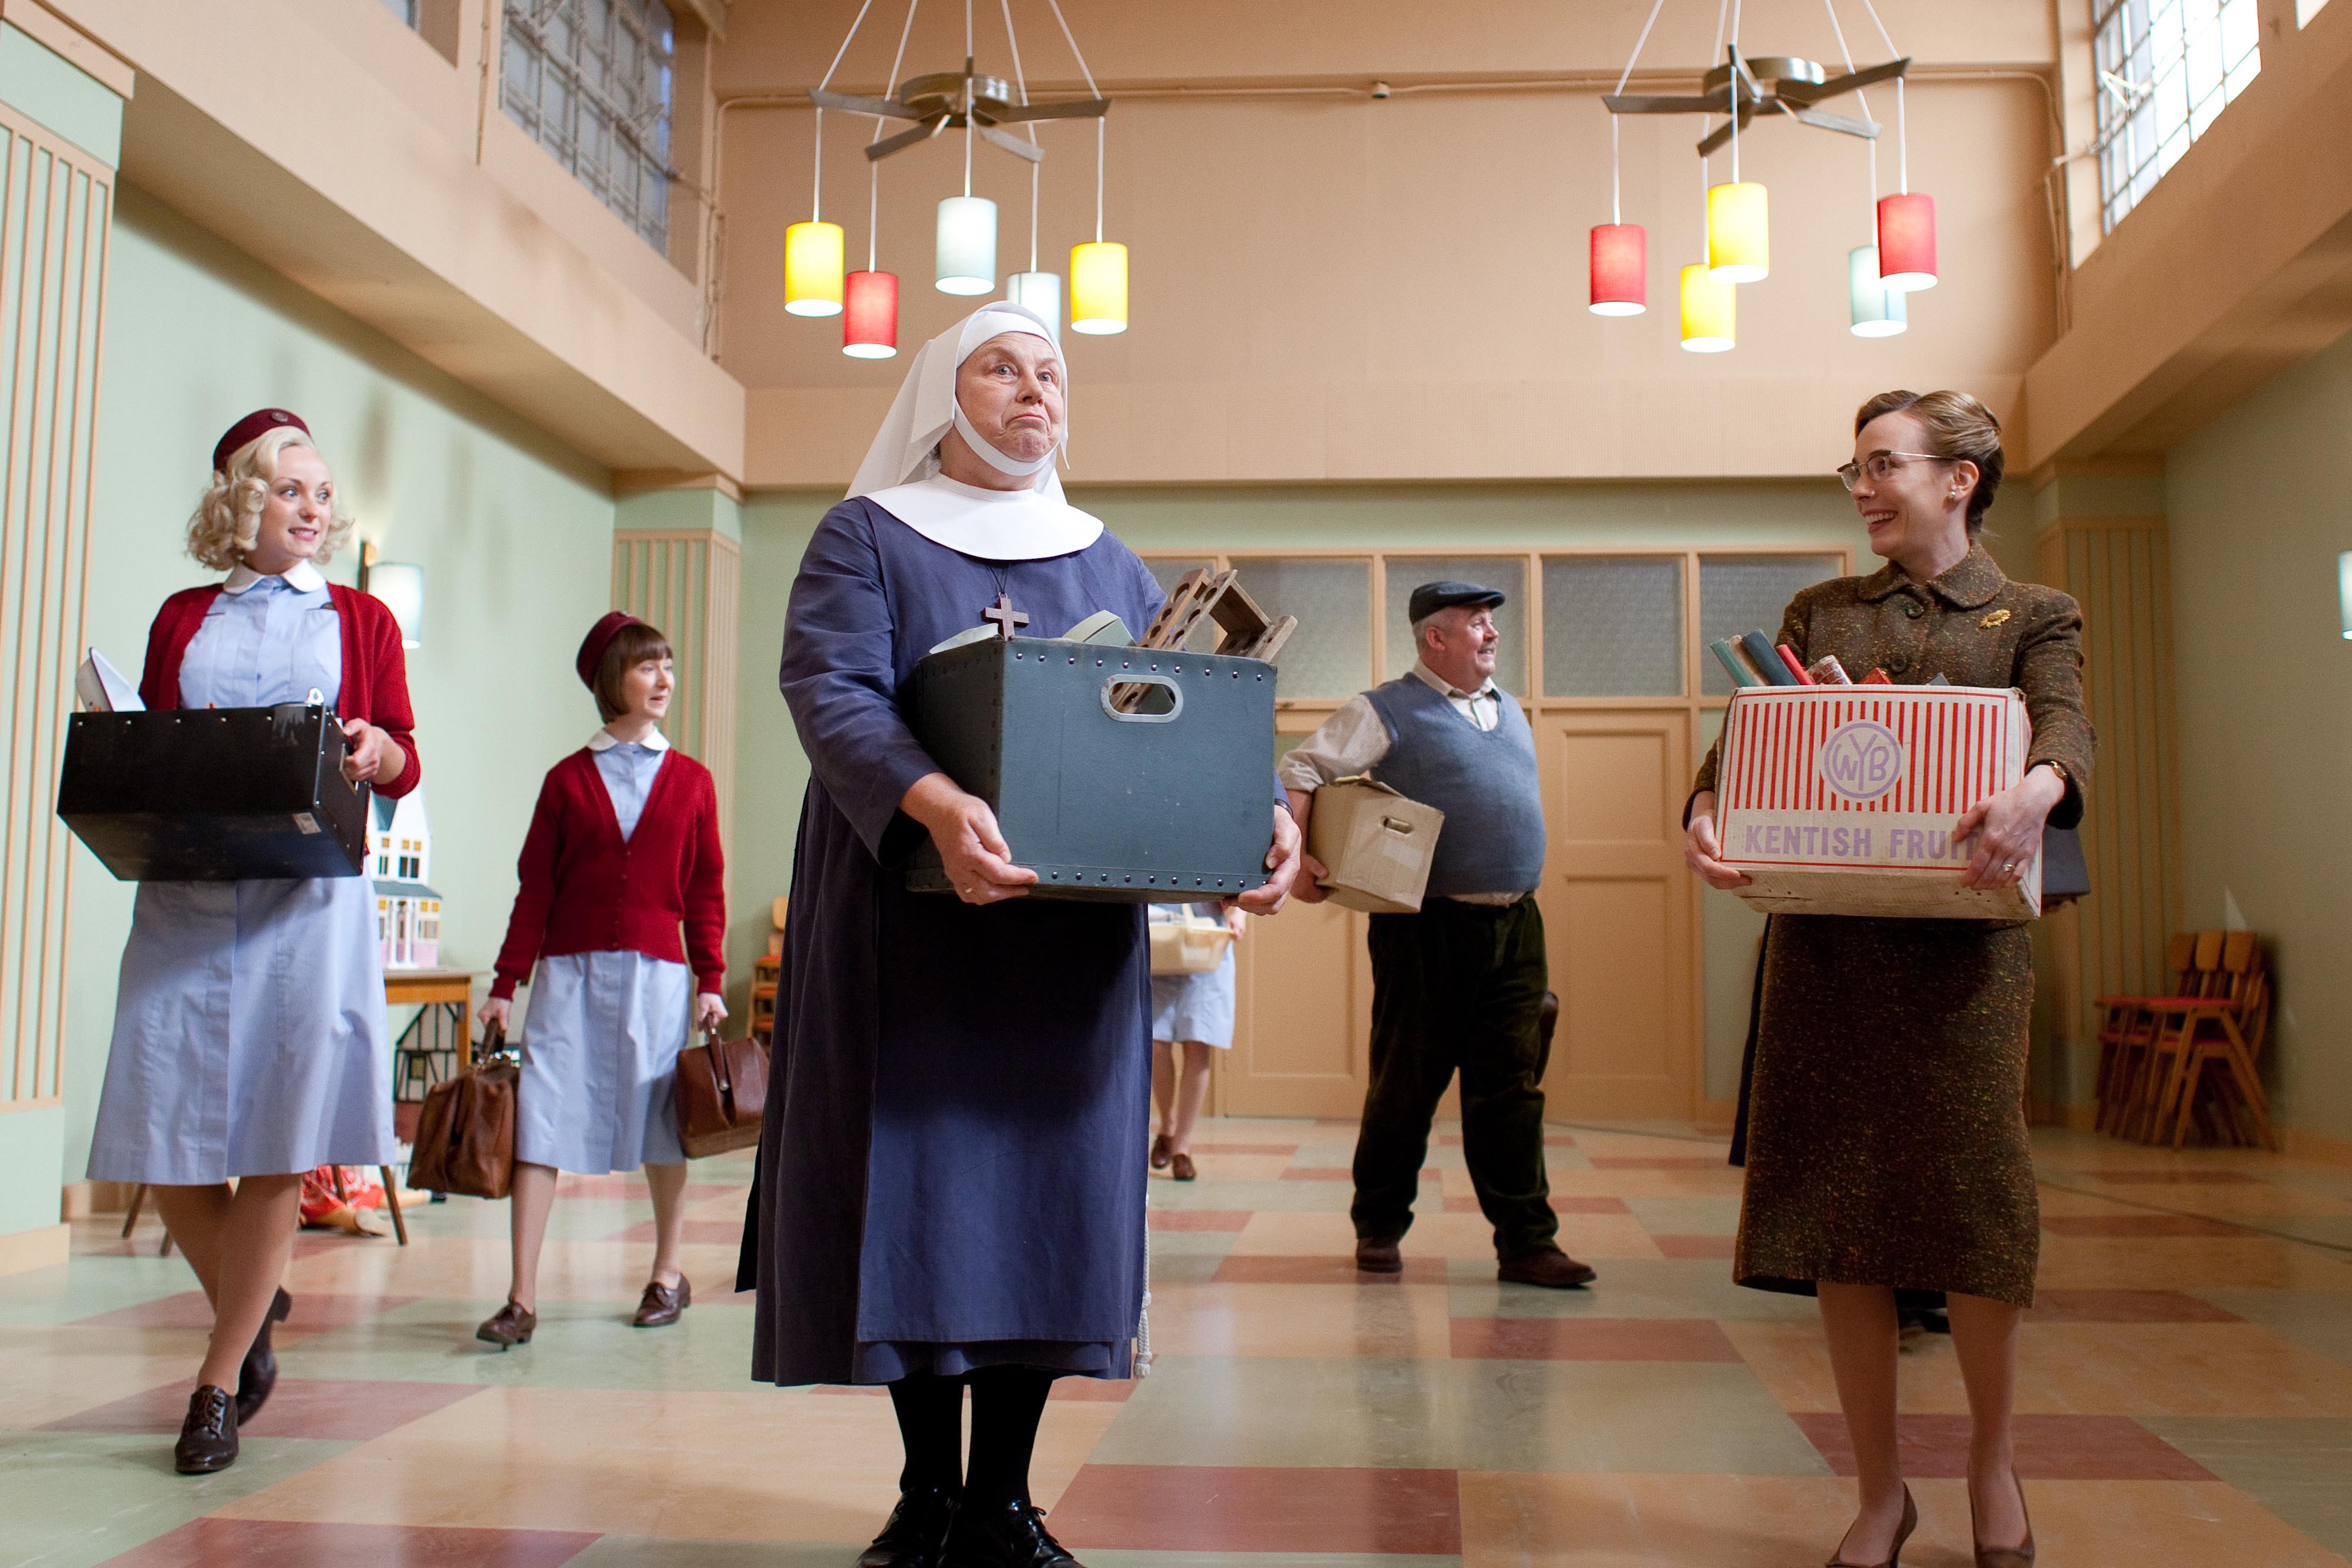 Welcome back to a new season of "Call the Midwife"! (All Photos: Courtesy of Laurence Cendrowicz)